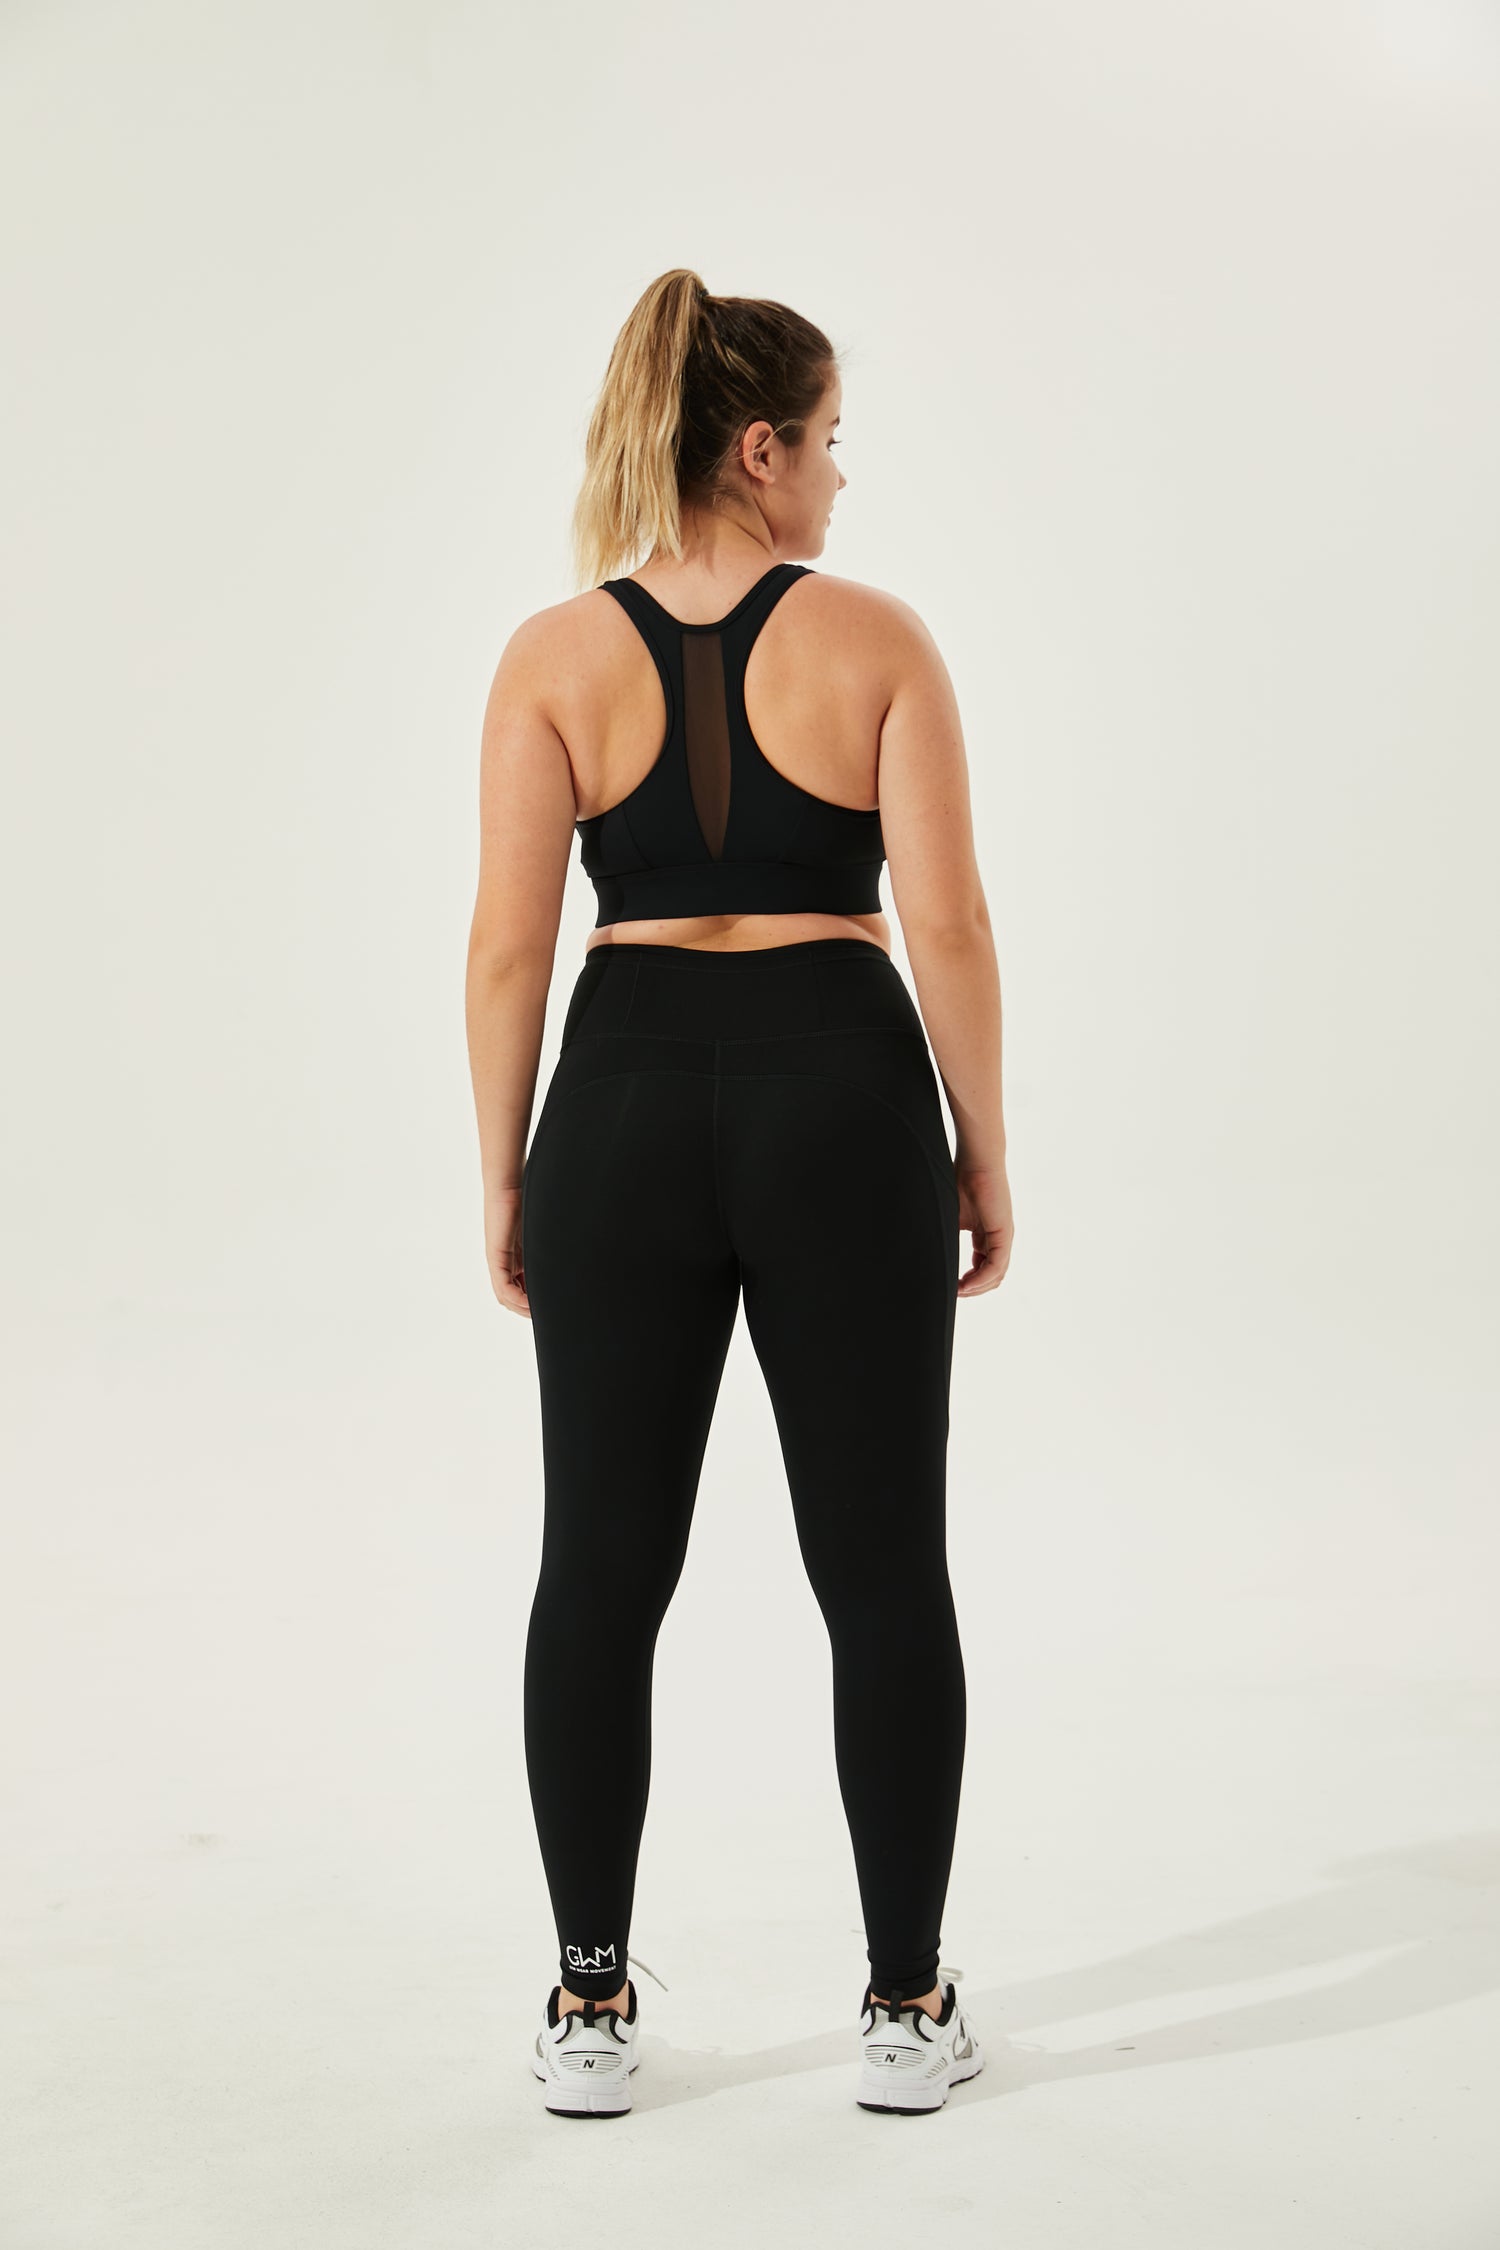 Cooling Air Running Shorts With Inner Tights And Pockets